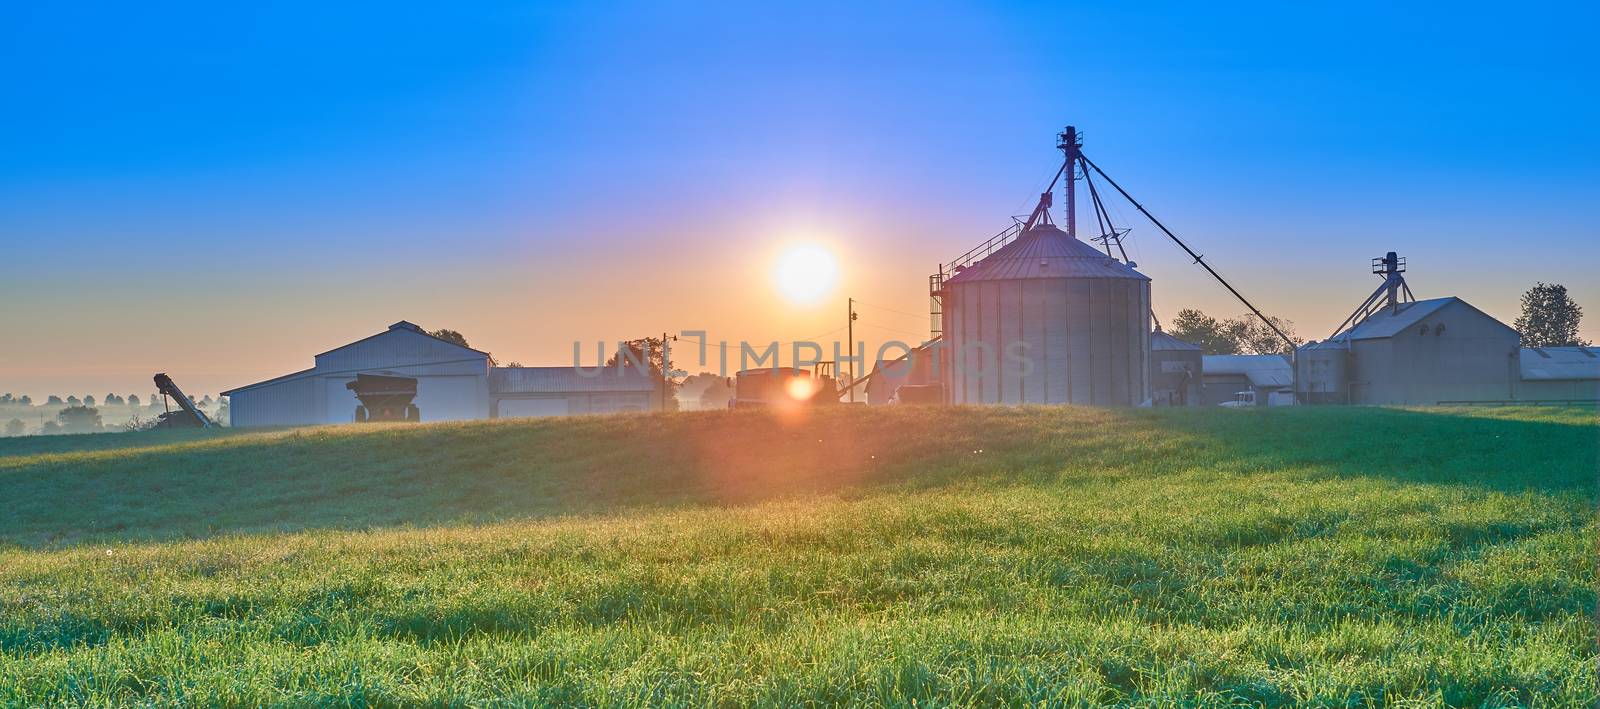 Sunrise Over Farm with Silo and blue Sky. by patrickstock